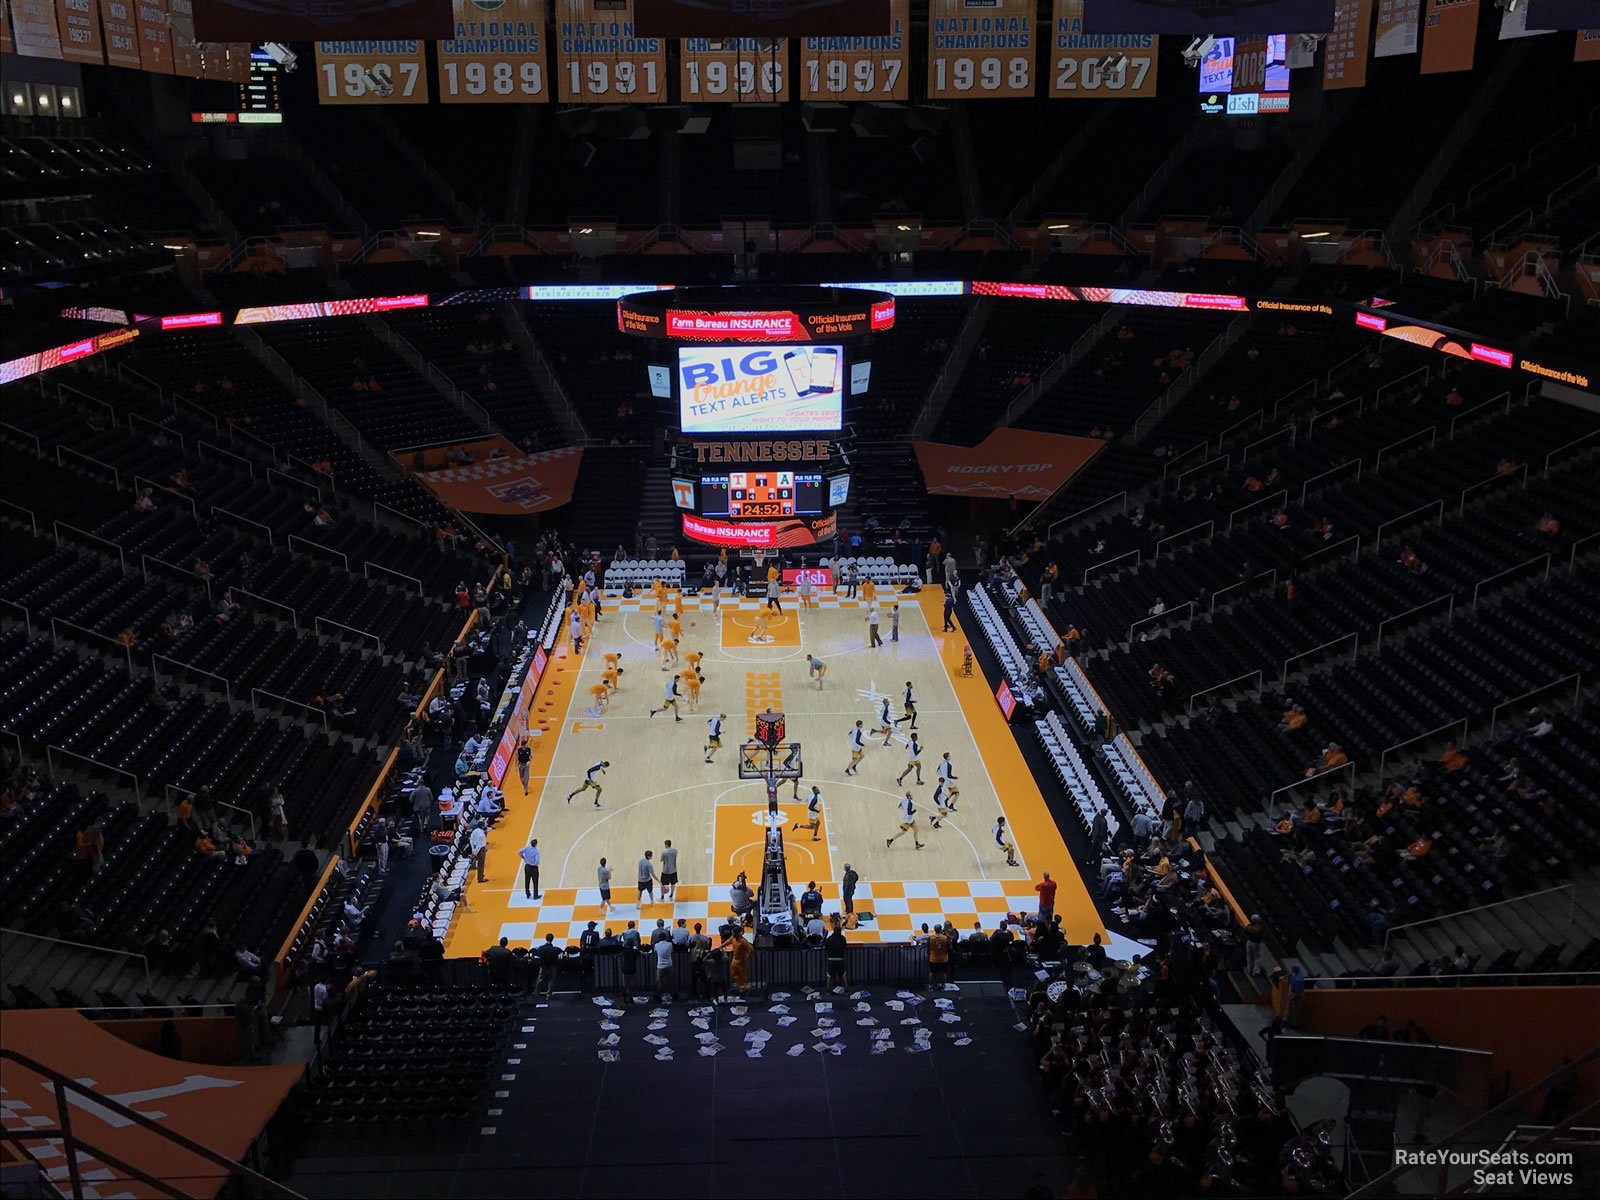 section 329, row 7 seat view  - thompson-boling arena